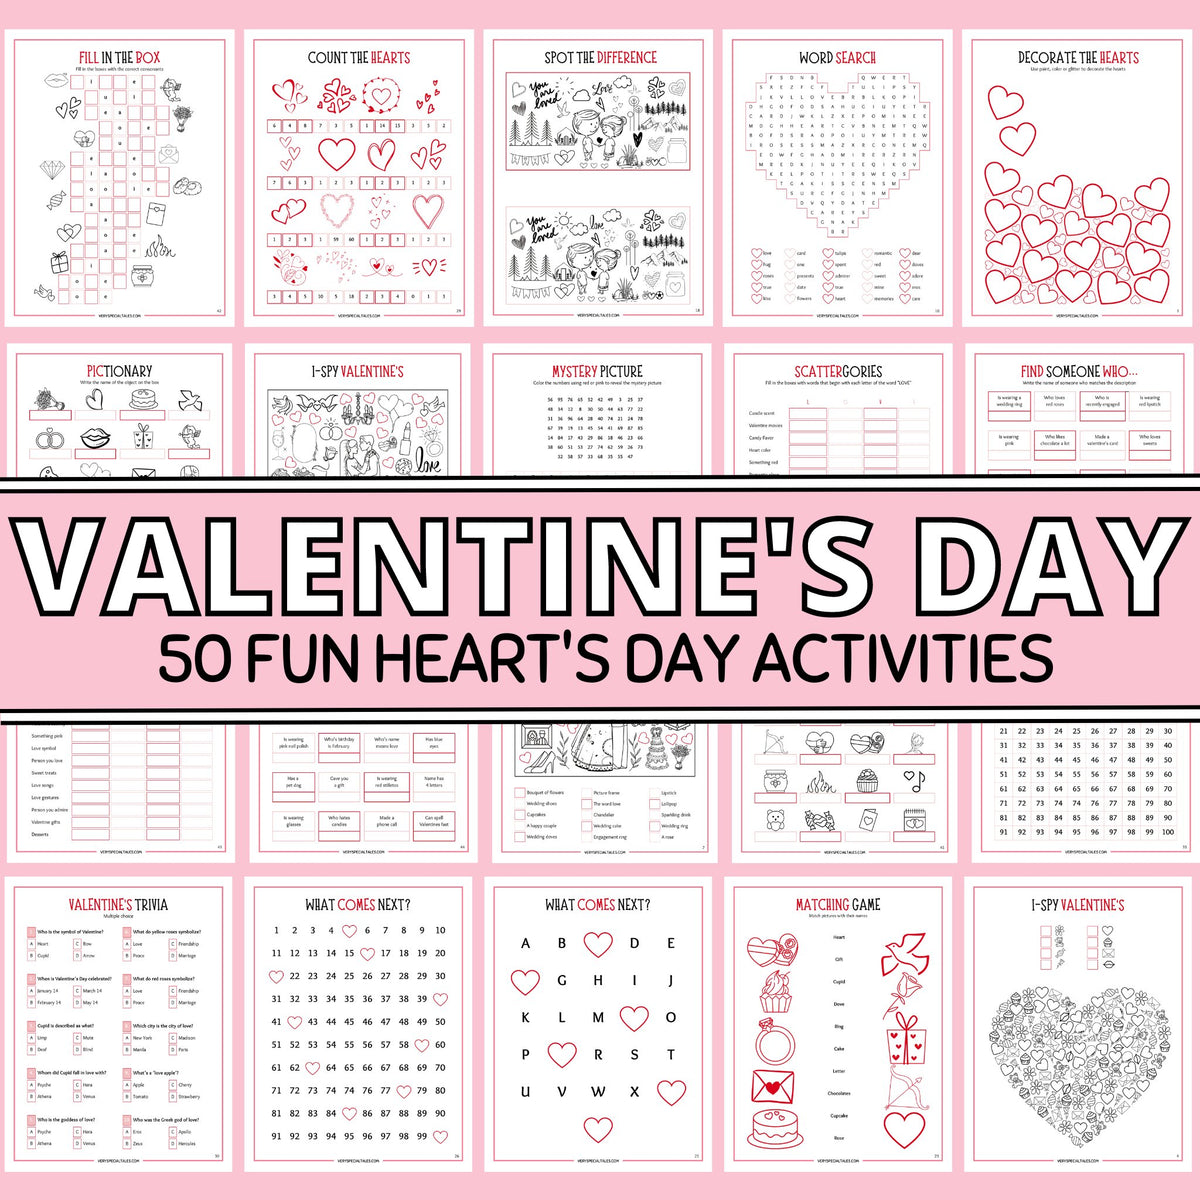 20 Valentine's Day worksheets containing heart-themed activities for children, including questions/prompts, word searches, colouring pages and matching games.